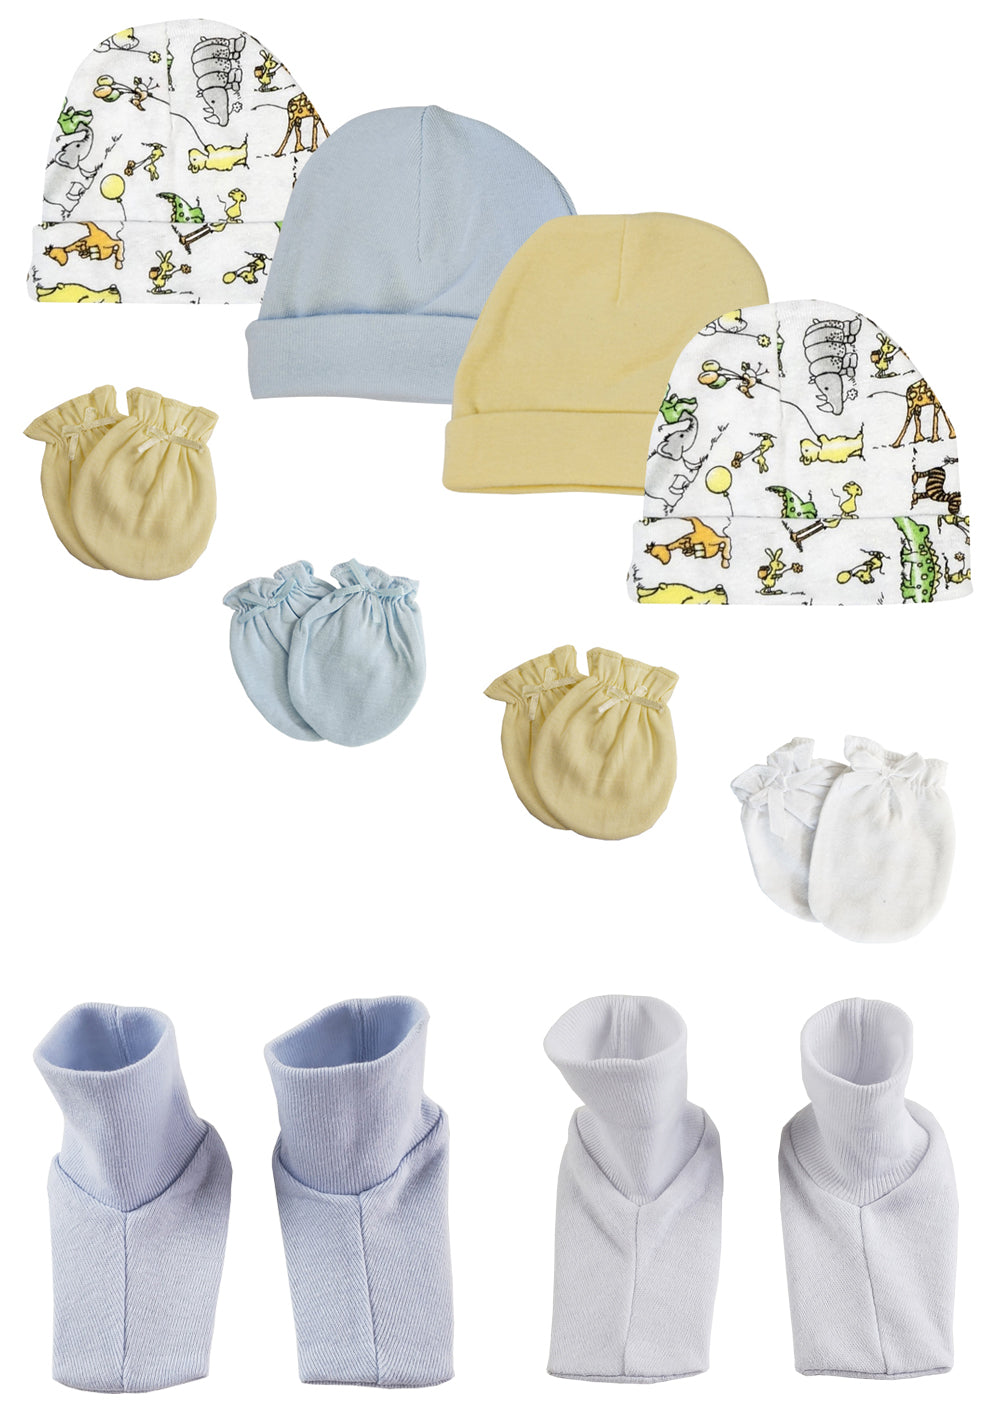 Boys Baby Caps, Booties and Mittens (Pack of 10) NC_0289